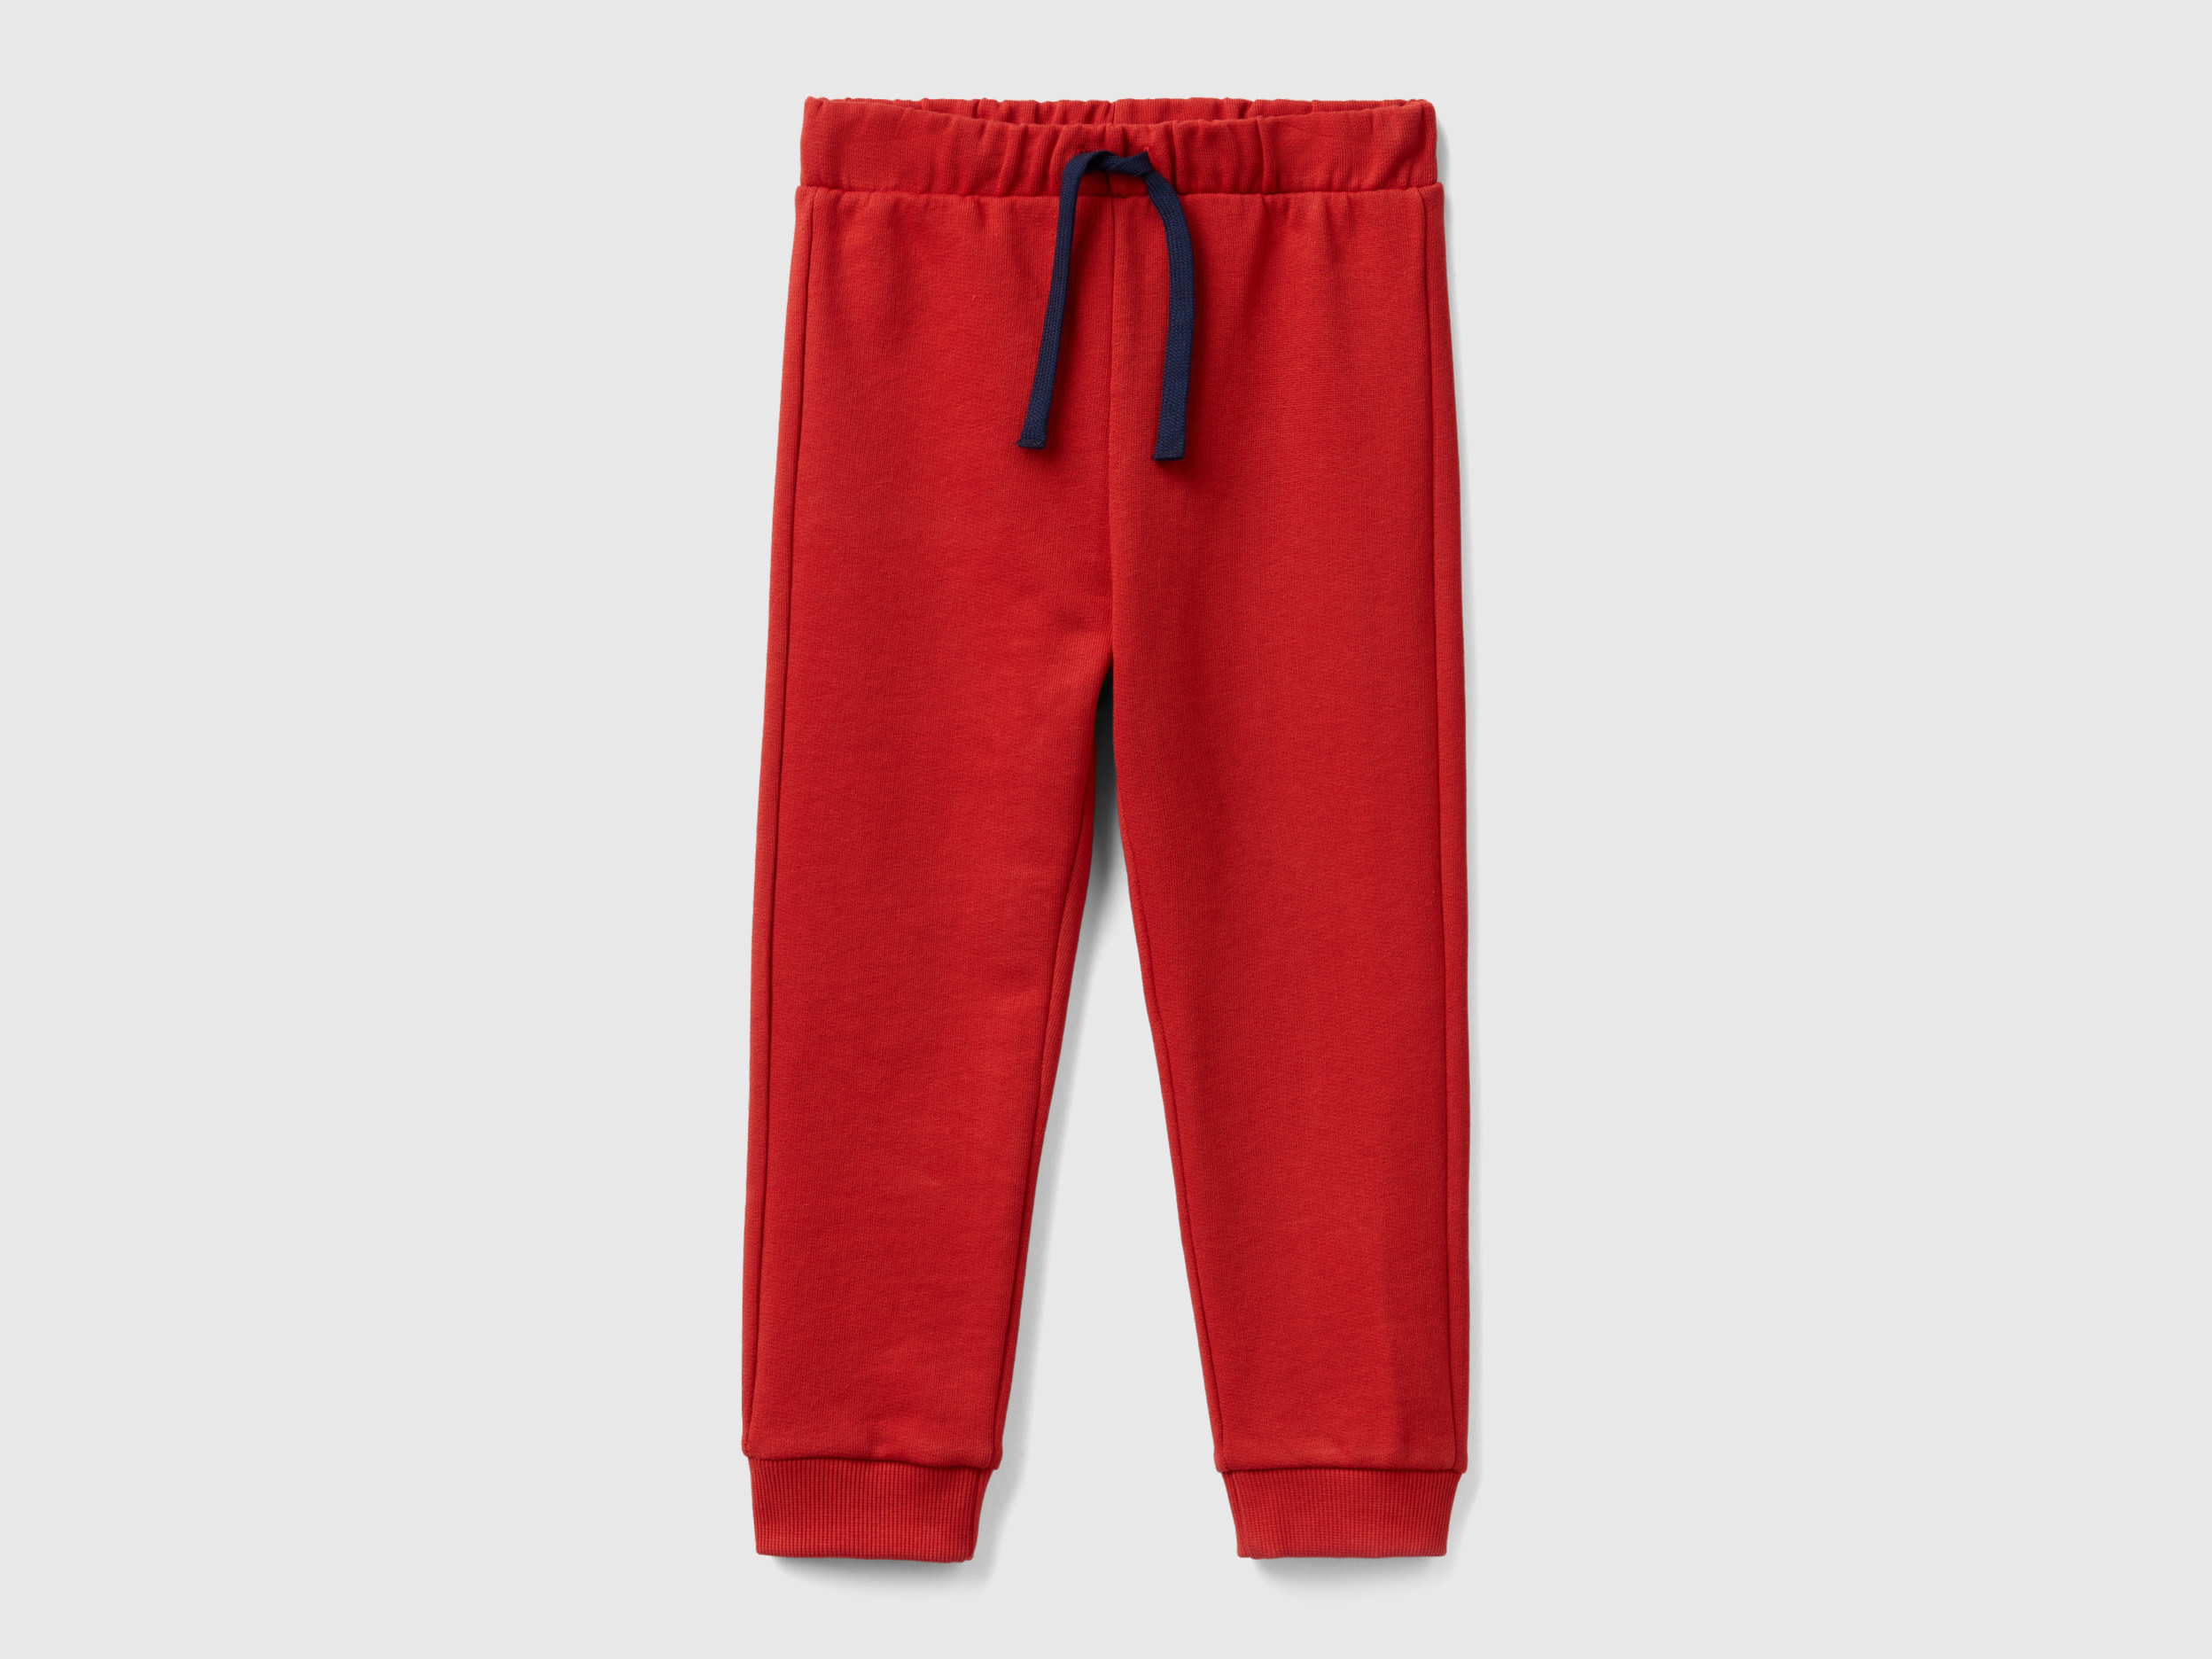 Benetton, Sweatpants With Pocket, size 12-18, Brick Red, Kids